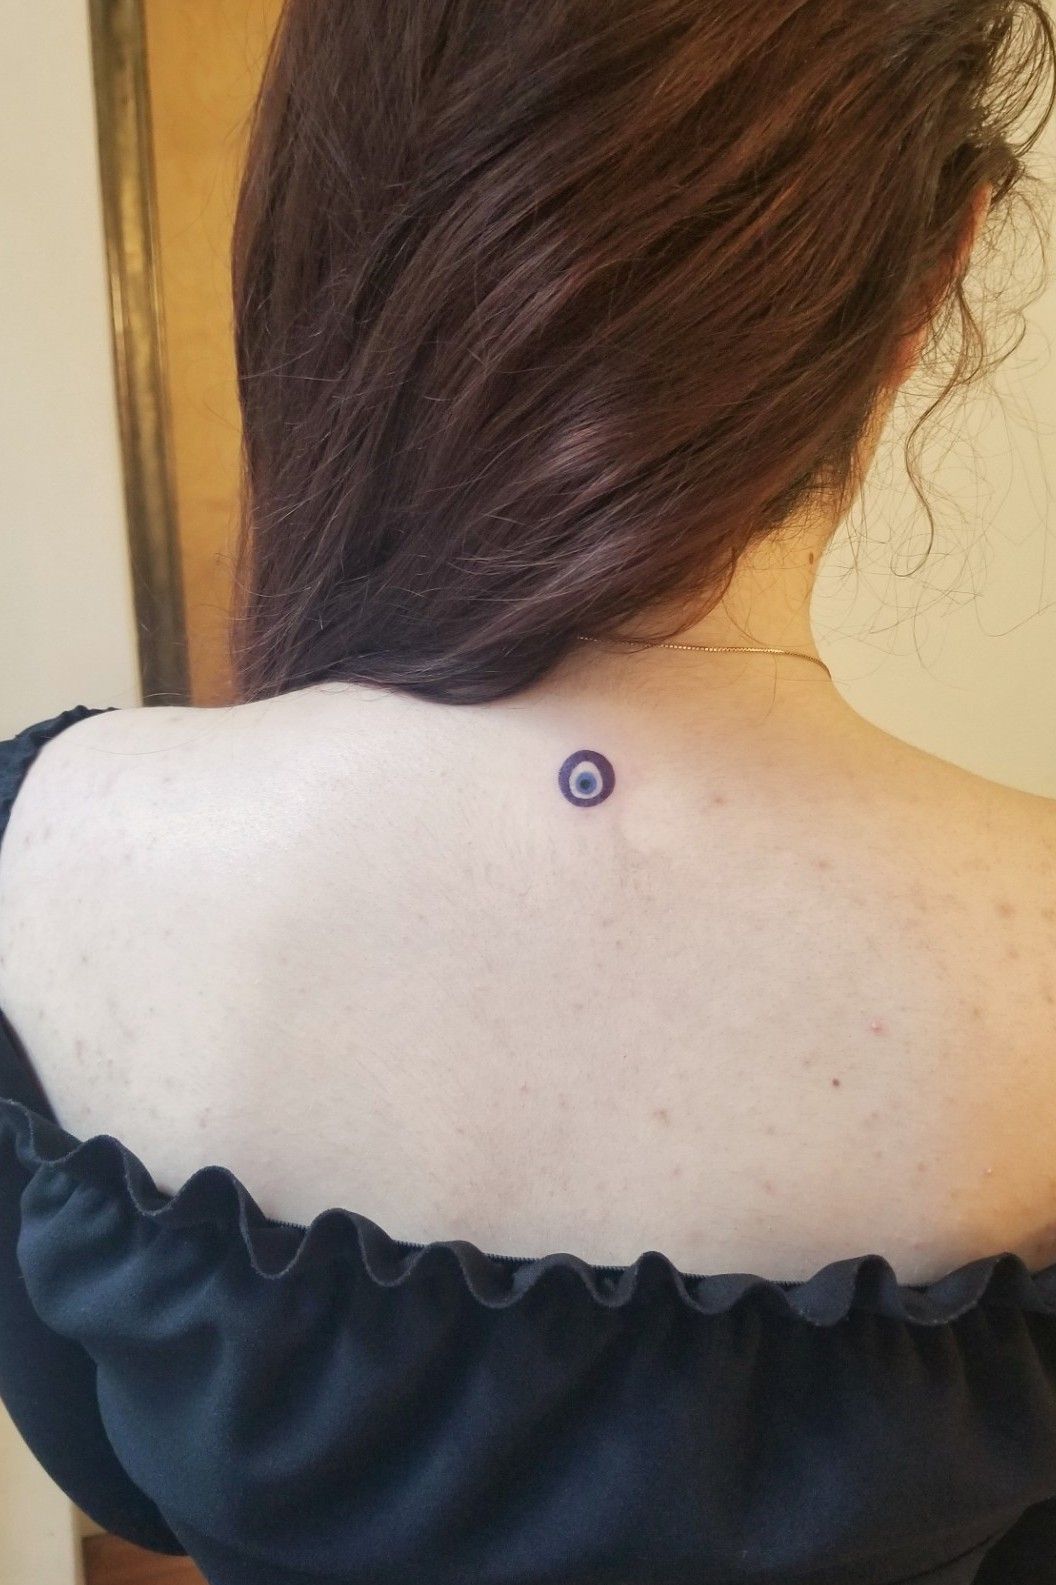 170 Awesome Evil Eye Tattoos Designs with Meanings 2023  TattoosBoyGirl